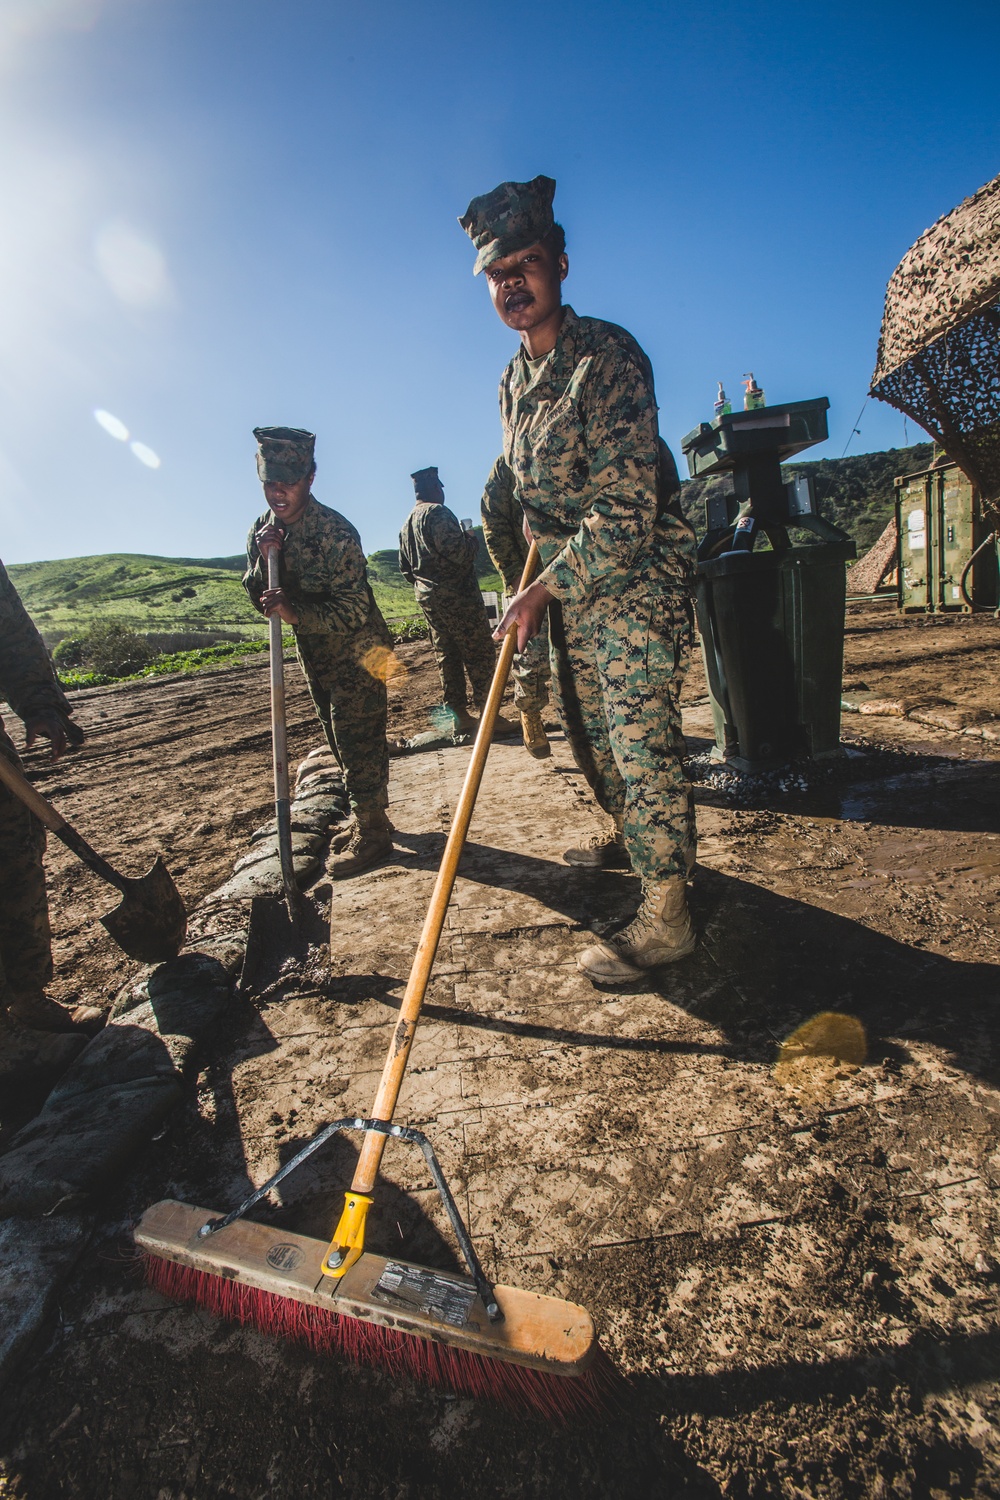 1st Marine Logistics Group Food Service Company Participating in WPT Hill Competition